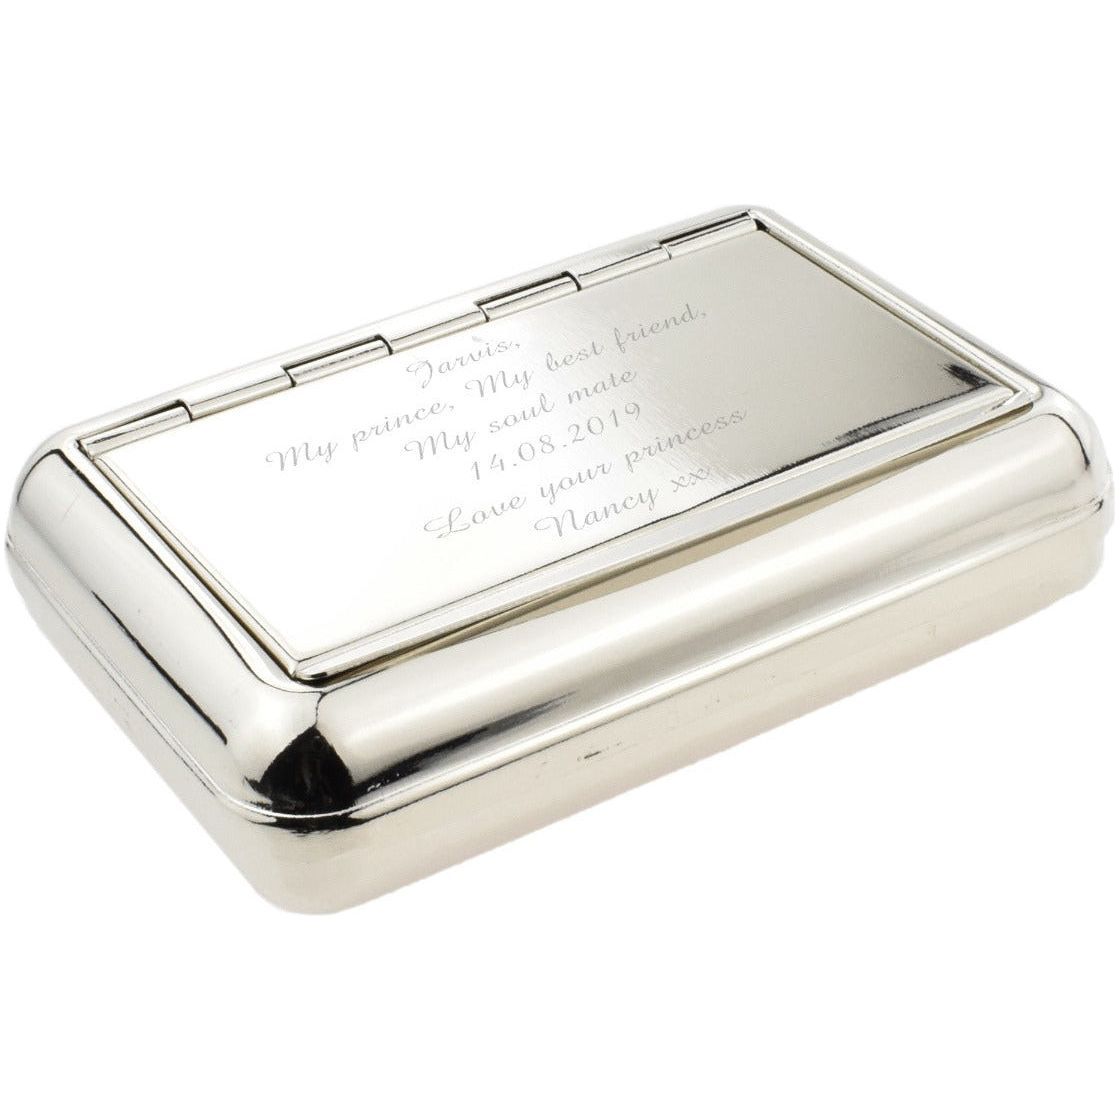 High Polish SS Tobacco Box Hinged Lid and Paper Holder Engraved and Personalised - Ashton and Finch